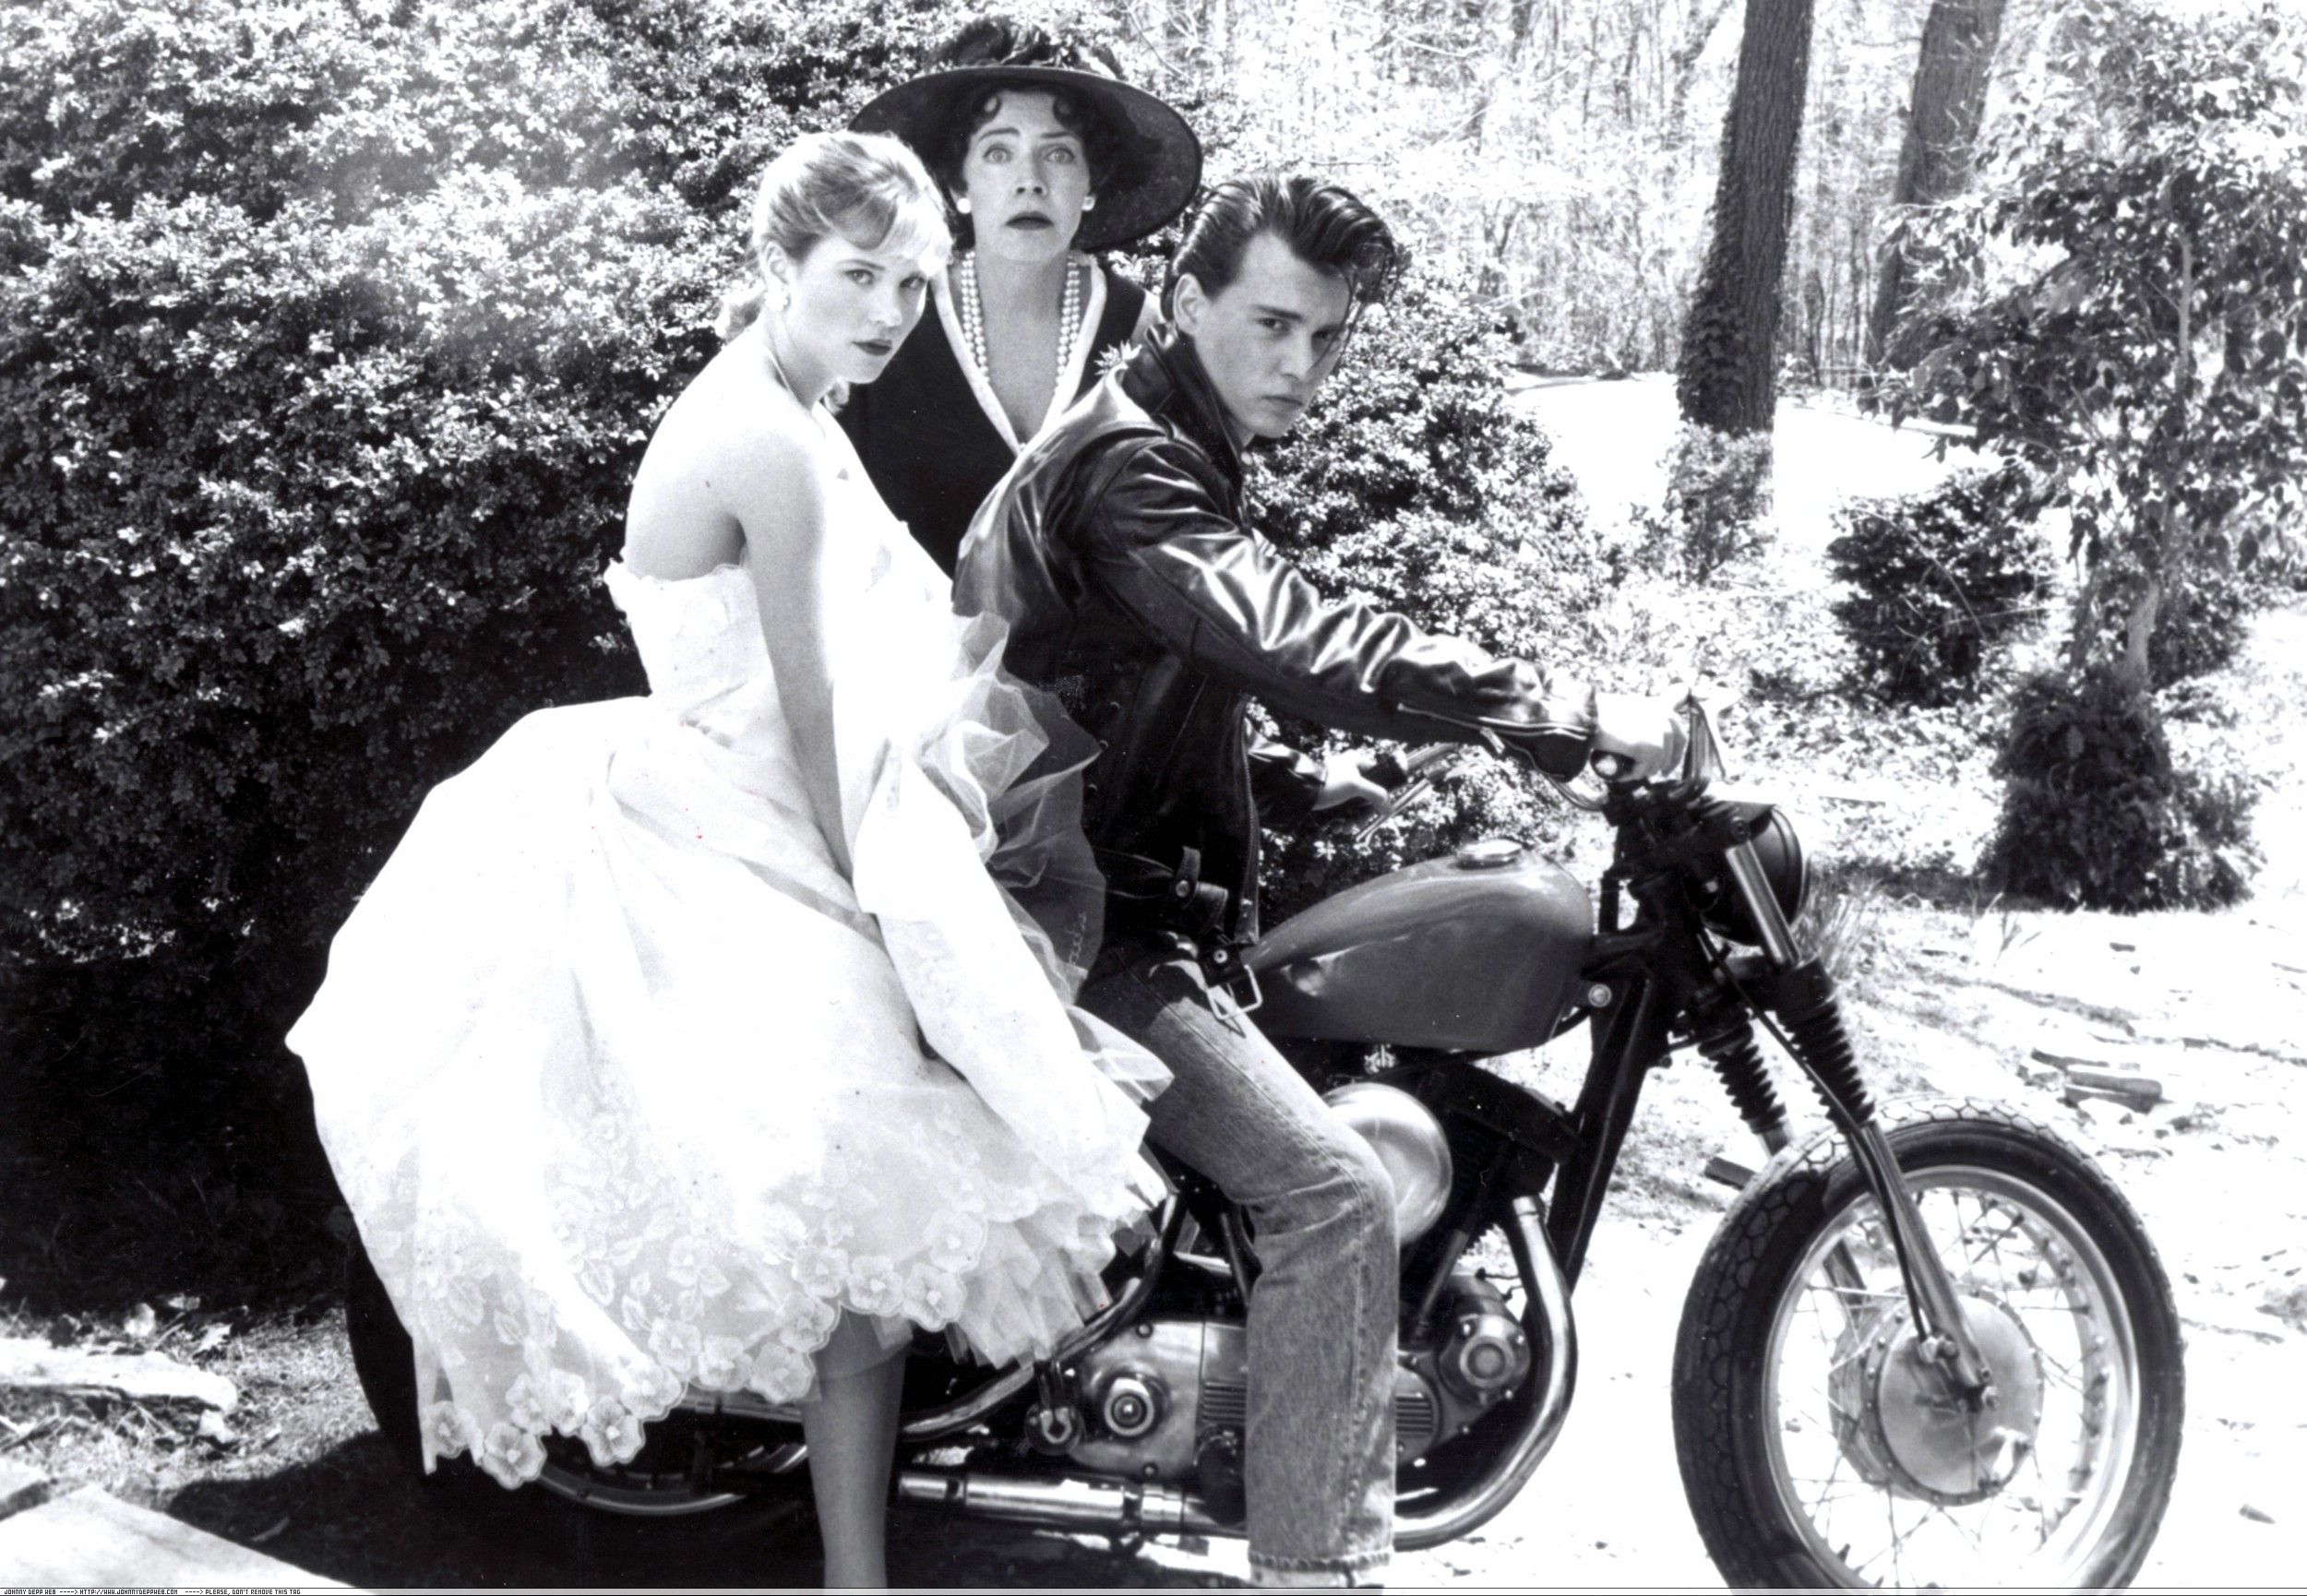 A picture of character 'Wade' on his motorcycle in the hit flick "Crybaby" (1990)